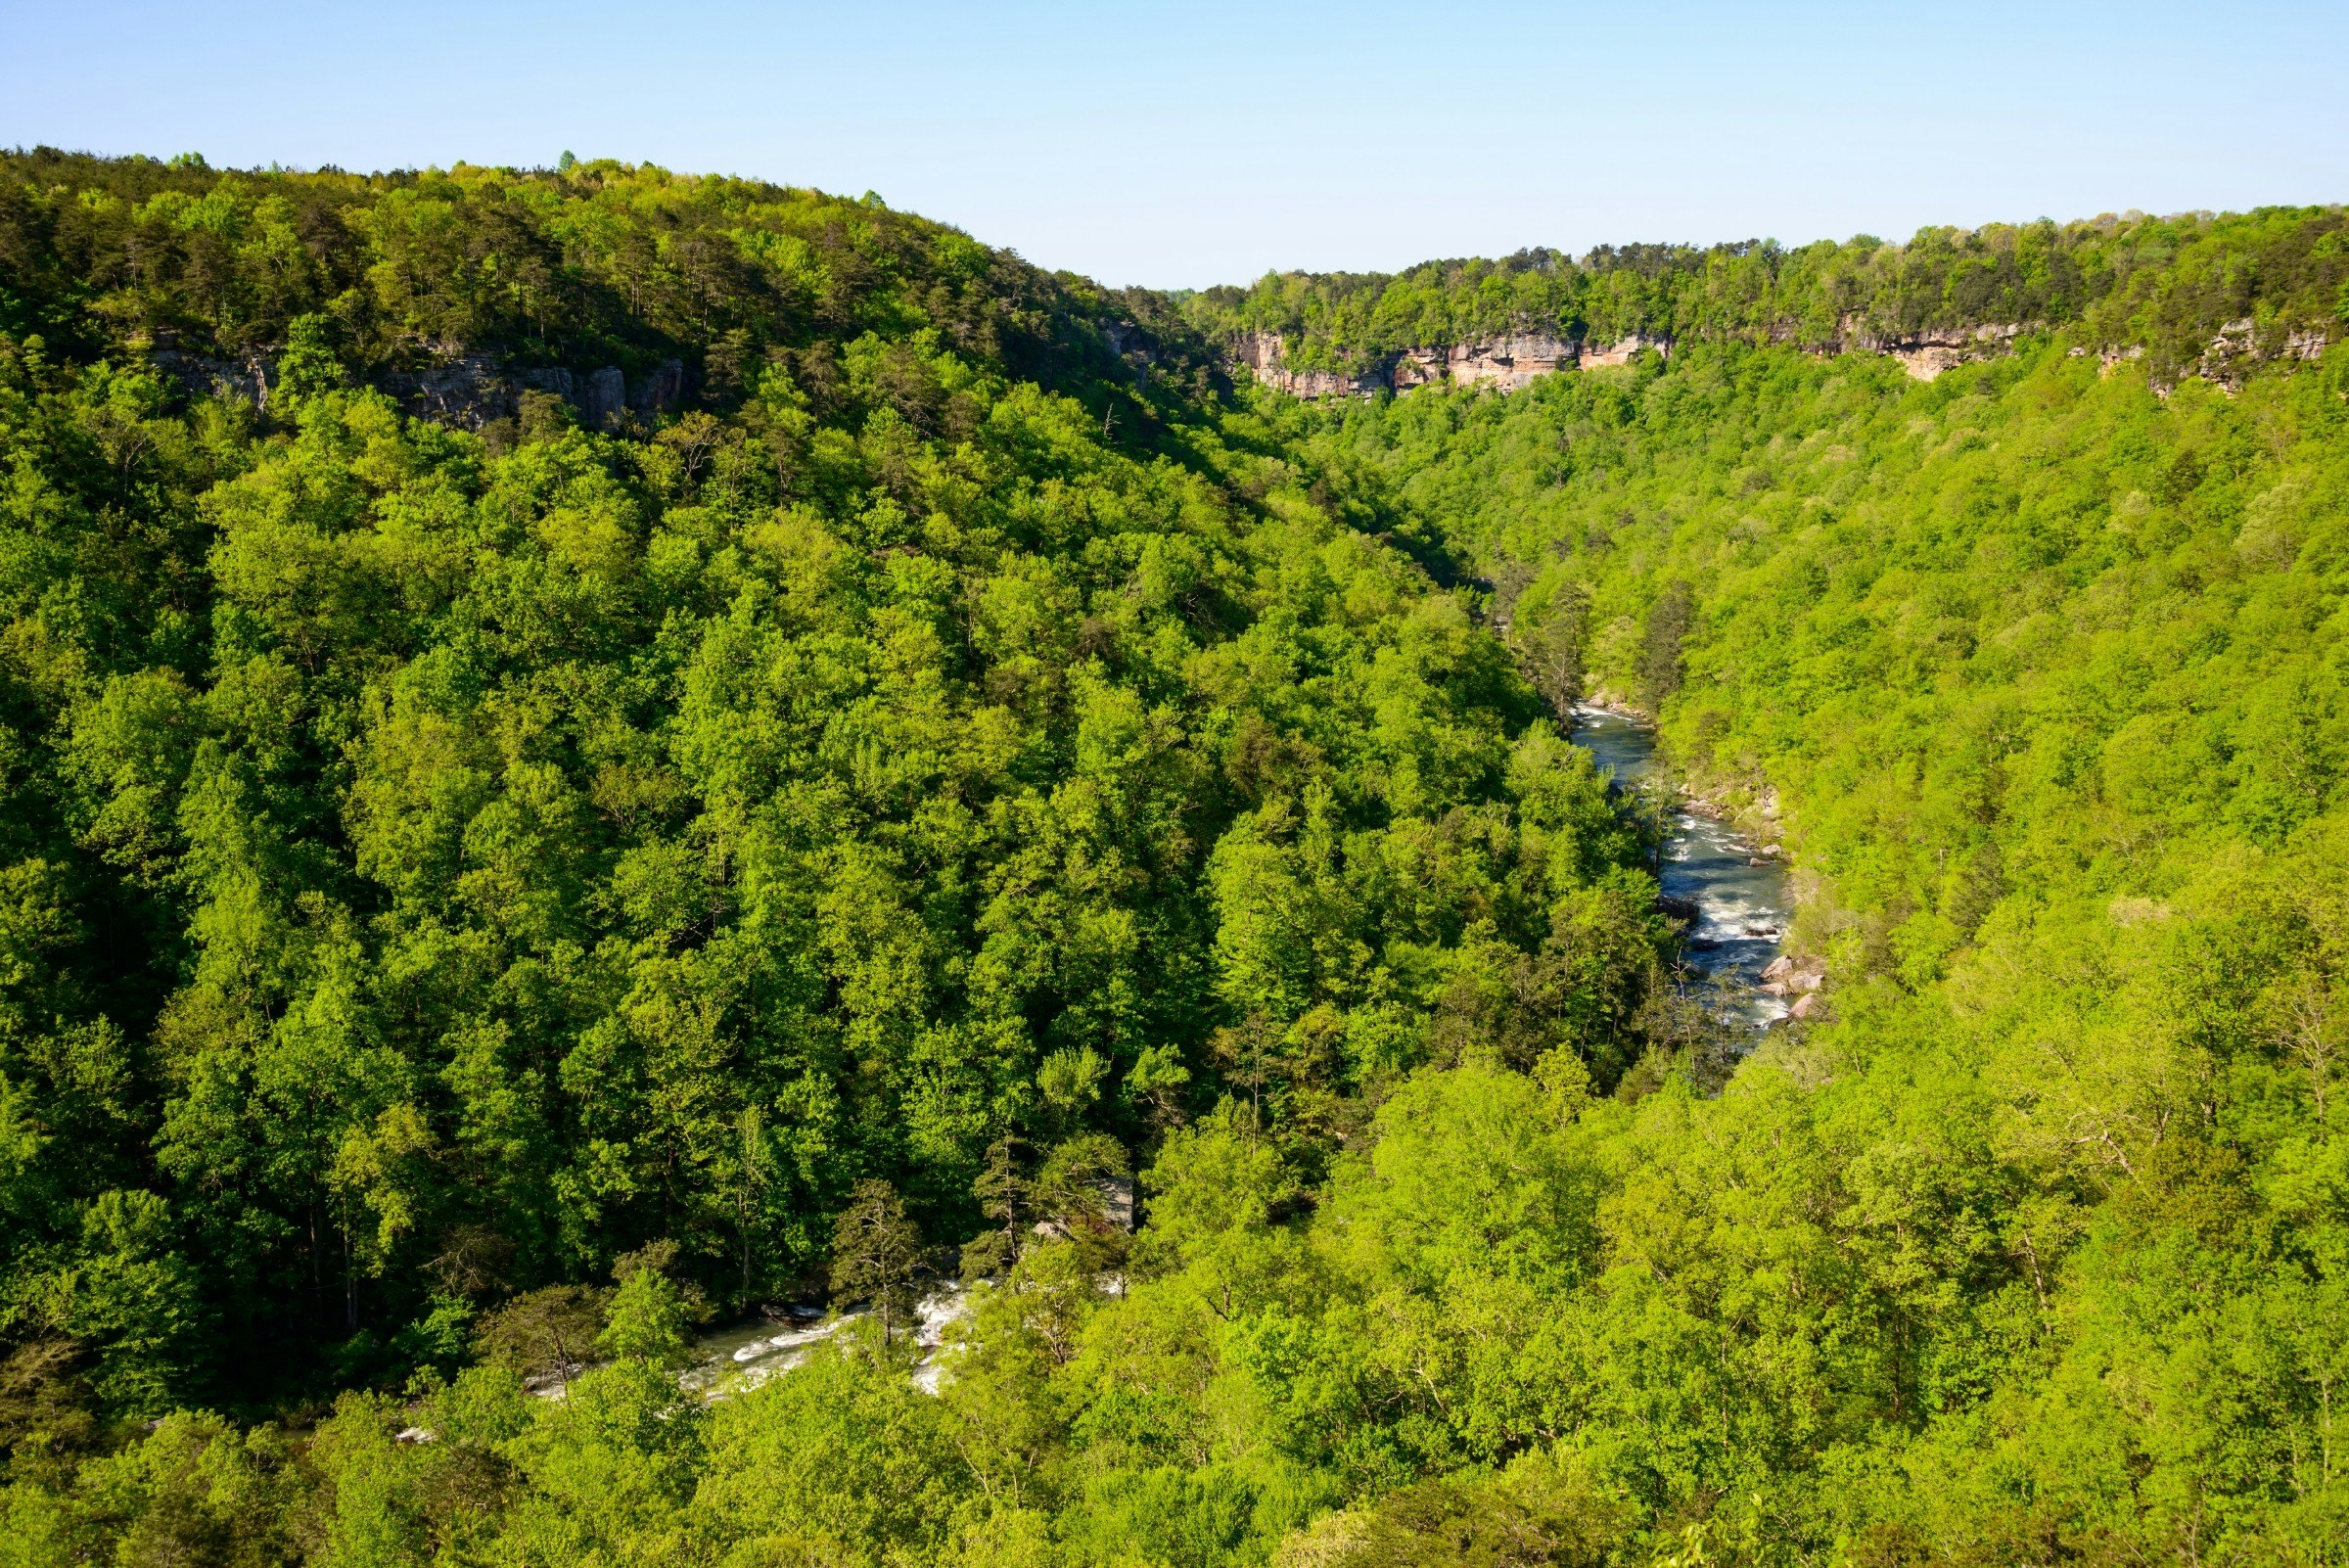 Trees in Little River Canyon National Preserve in Alabama